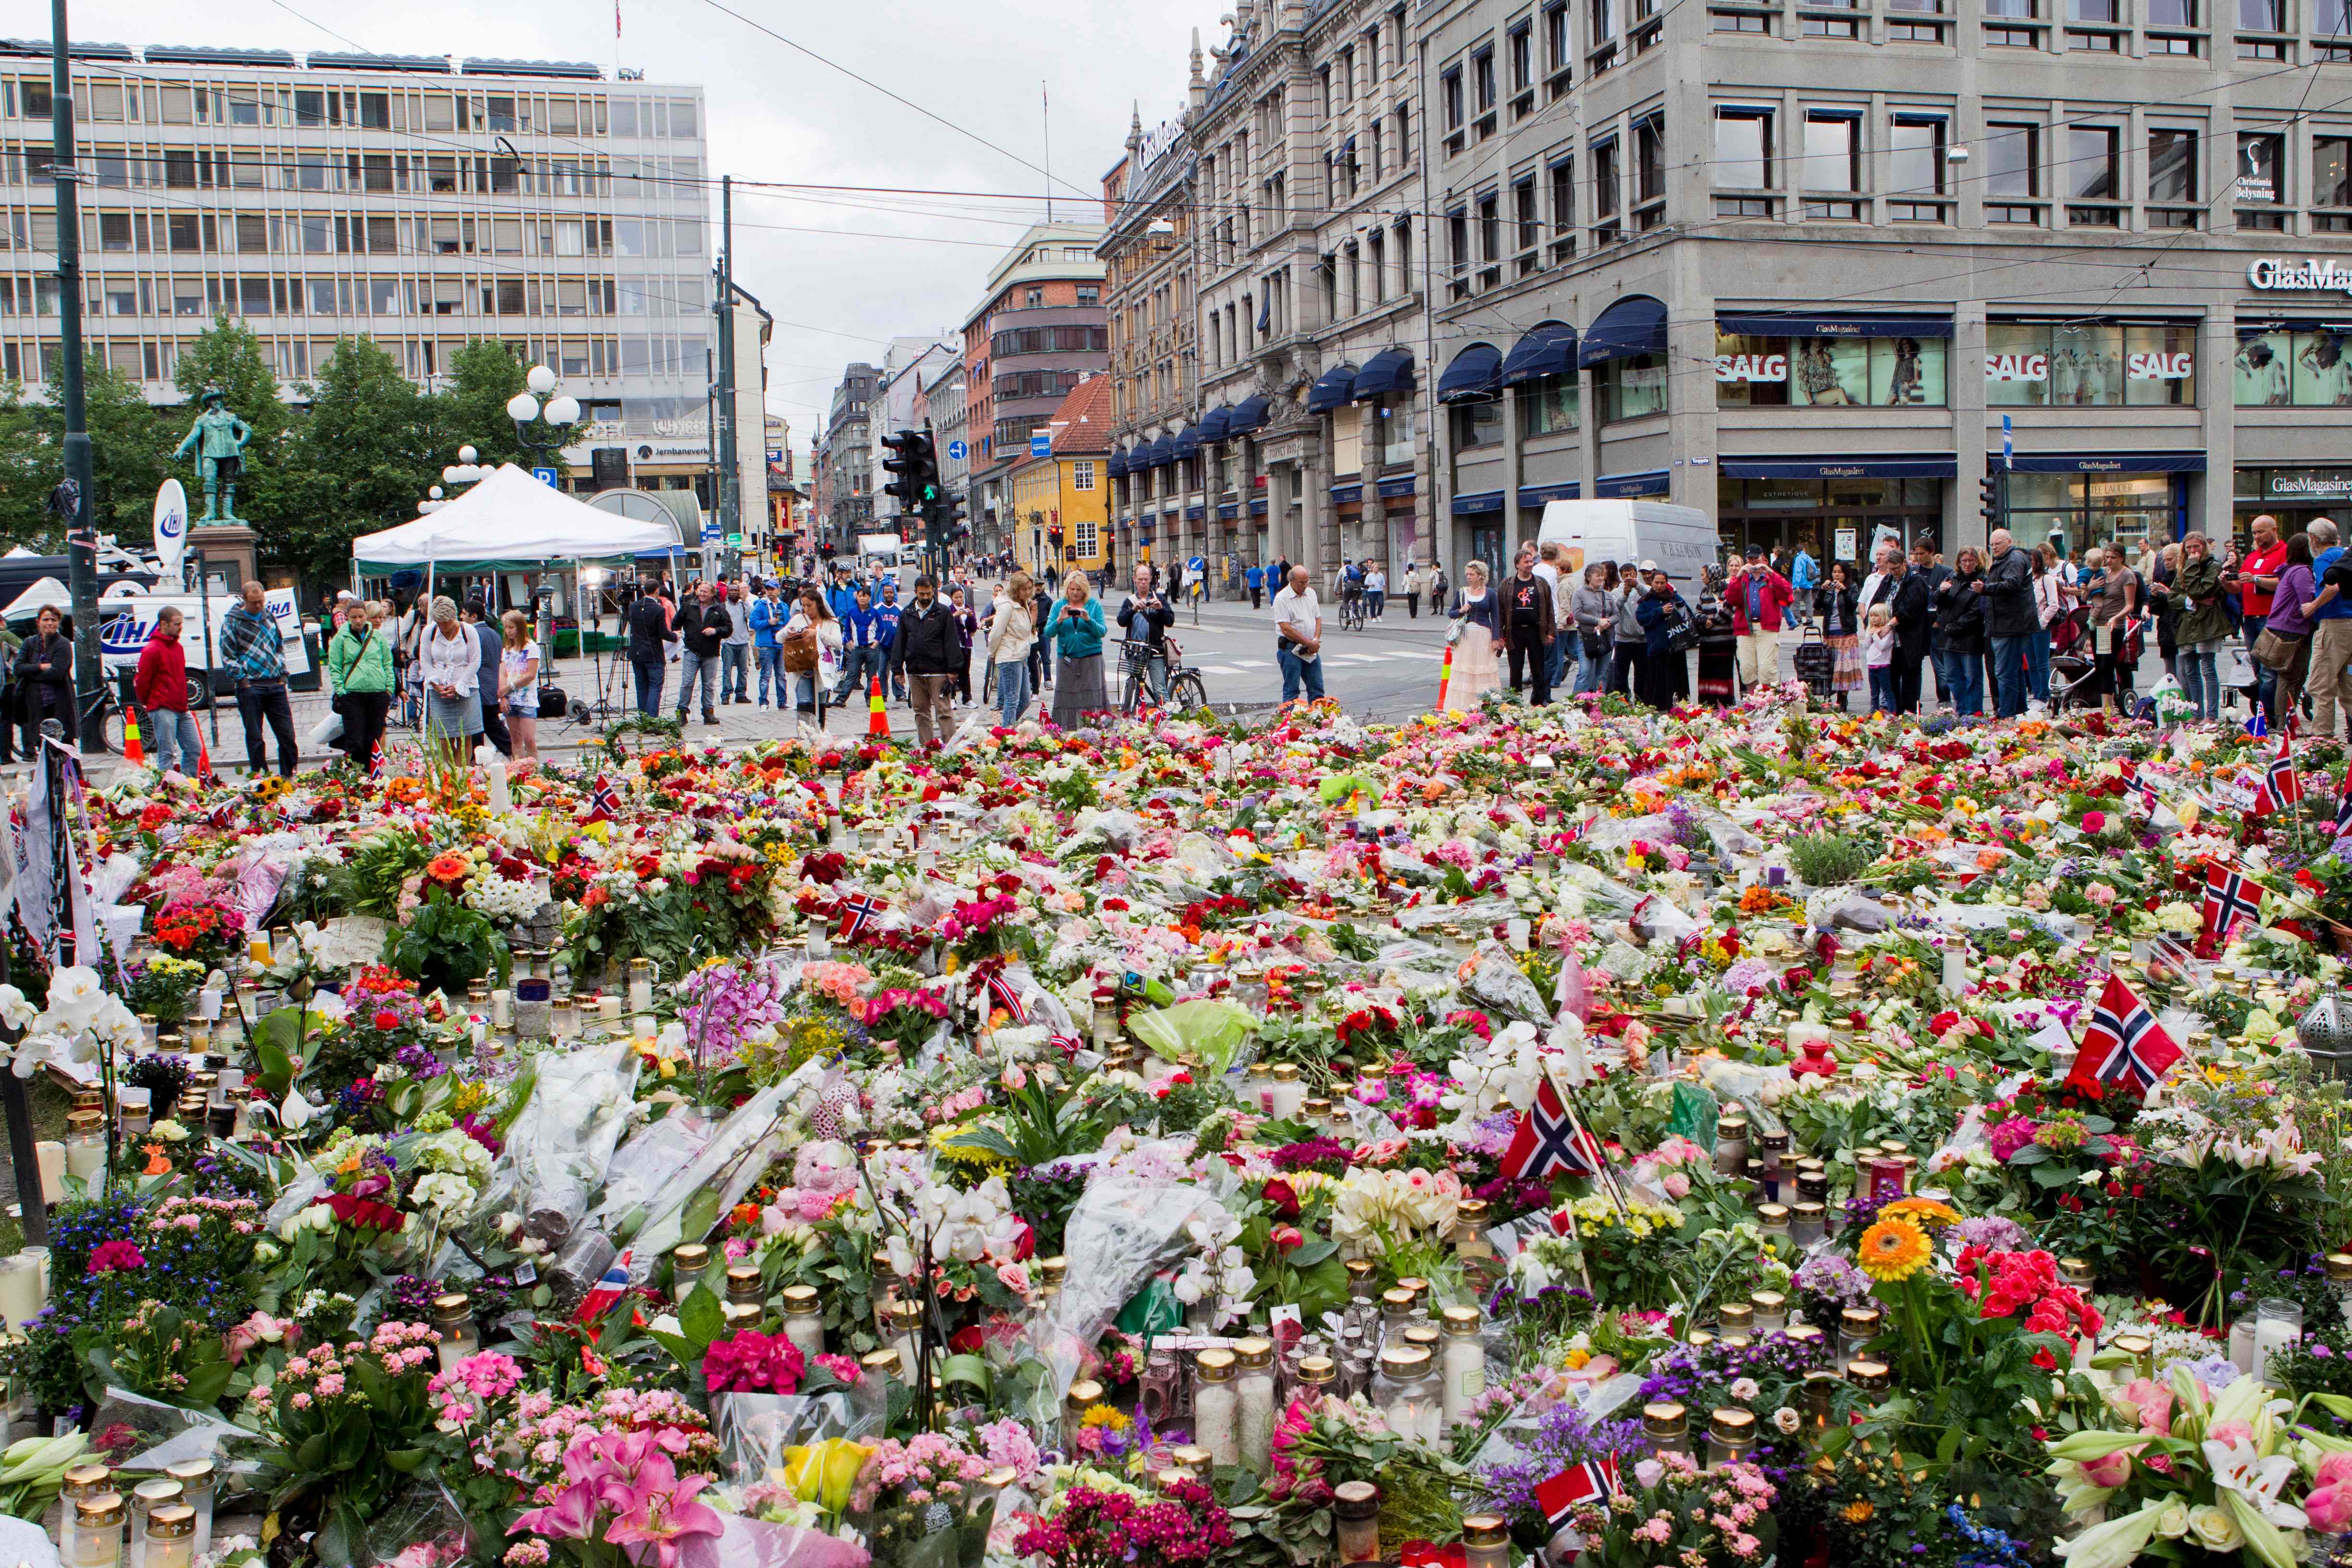 People gather in Oslo on 25 July 2011 to pay tribute to the victims of the recent bombing and shooting spree